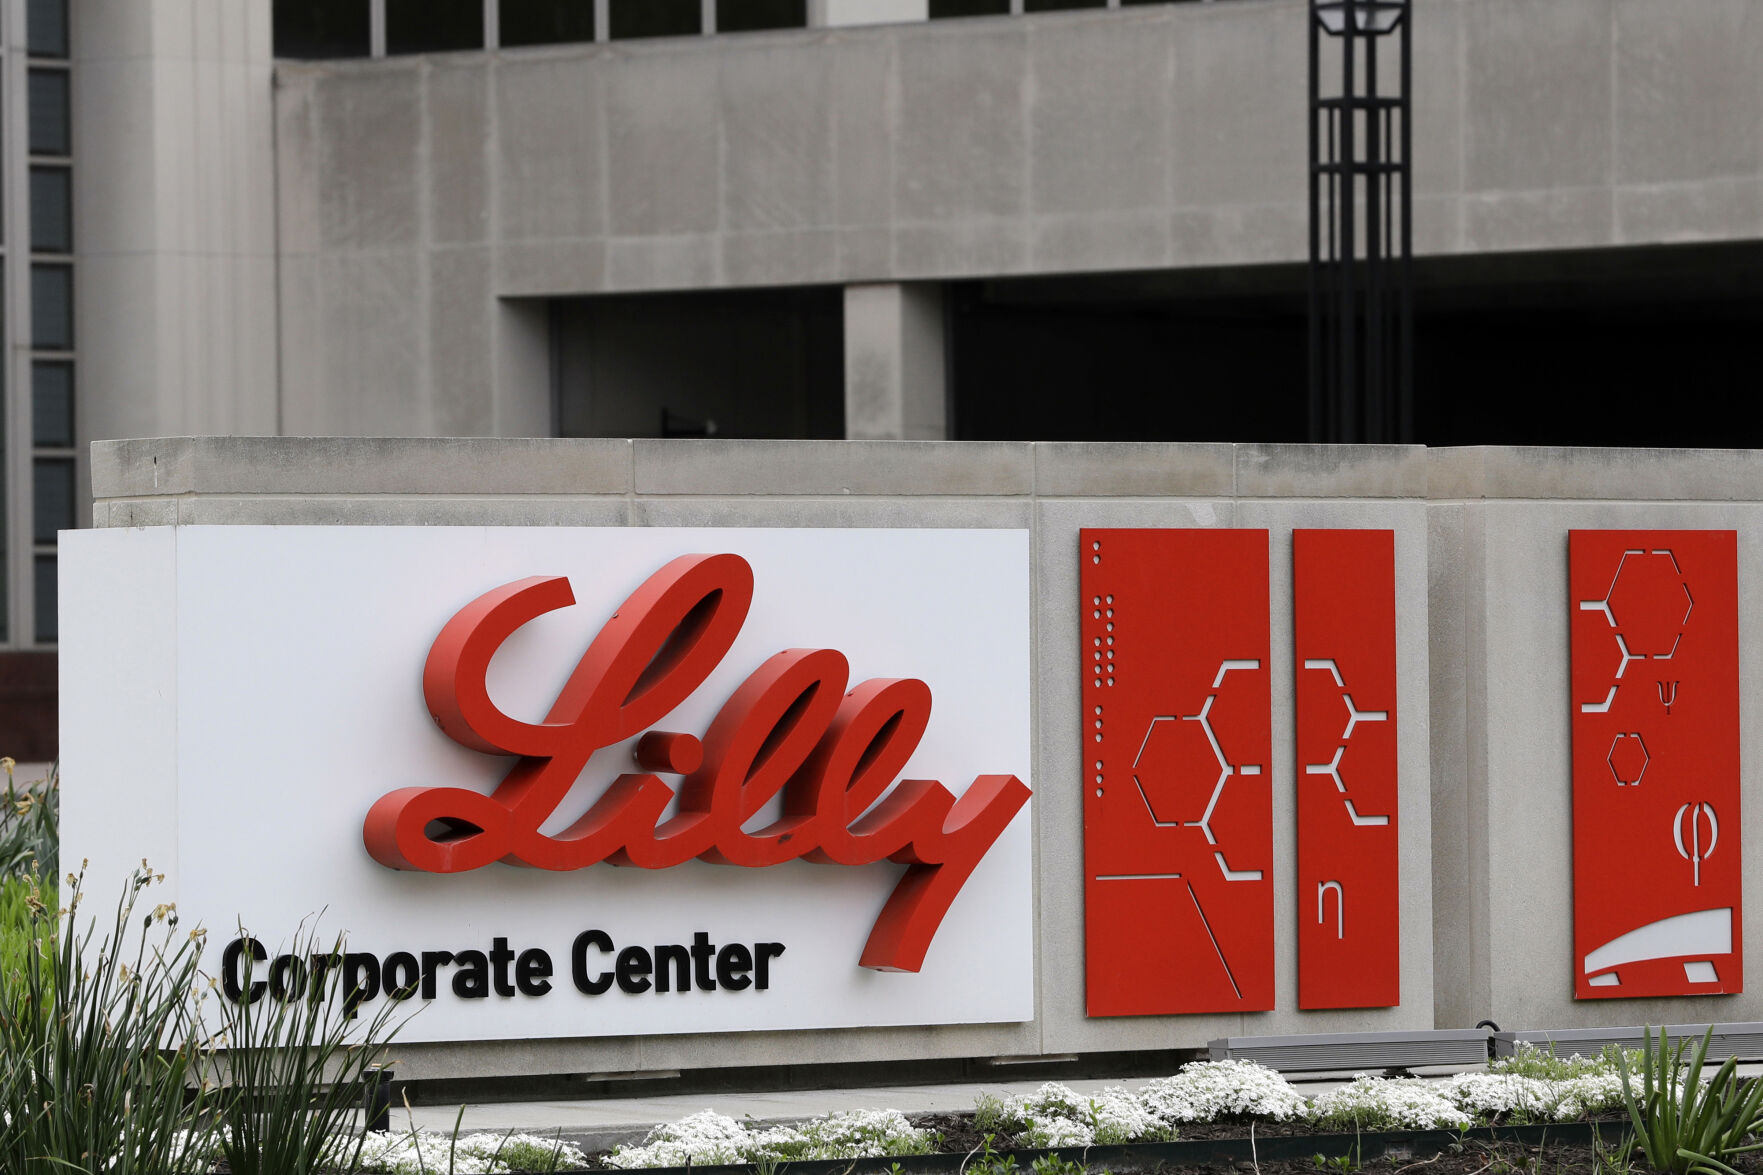 <p>FILE - This April 26, 2017, file photo shows the Eli Lilly & Co. corporate headquarters in Indianapolis. Eli Lilly announced on Wednesday, March 1, 2023, will cut prices for some older insulins later this year, and immediately expand a cap on costs insured patients pay when they fill prescriptions. The moves promise critical relief to some people with diabetes who can face thousands of dollars a year in bills for insulin they need to live. (AP Photo/Darron Cummings, File)</p>   PHOTO CREDIT: Darron Cummings